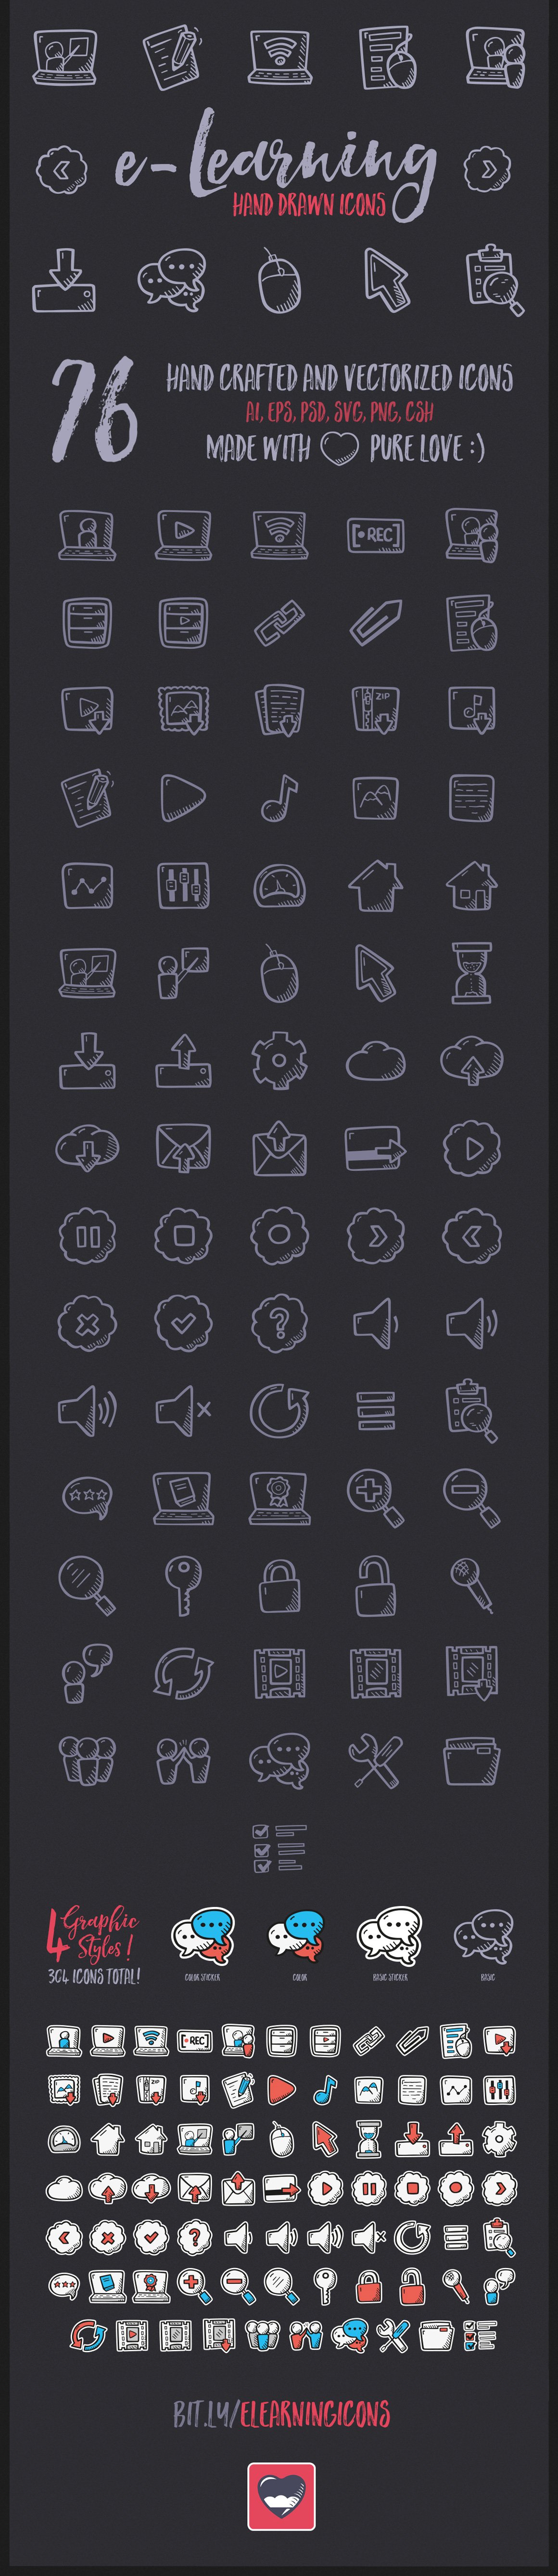 e learning icons 967